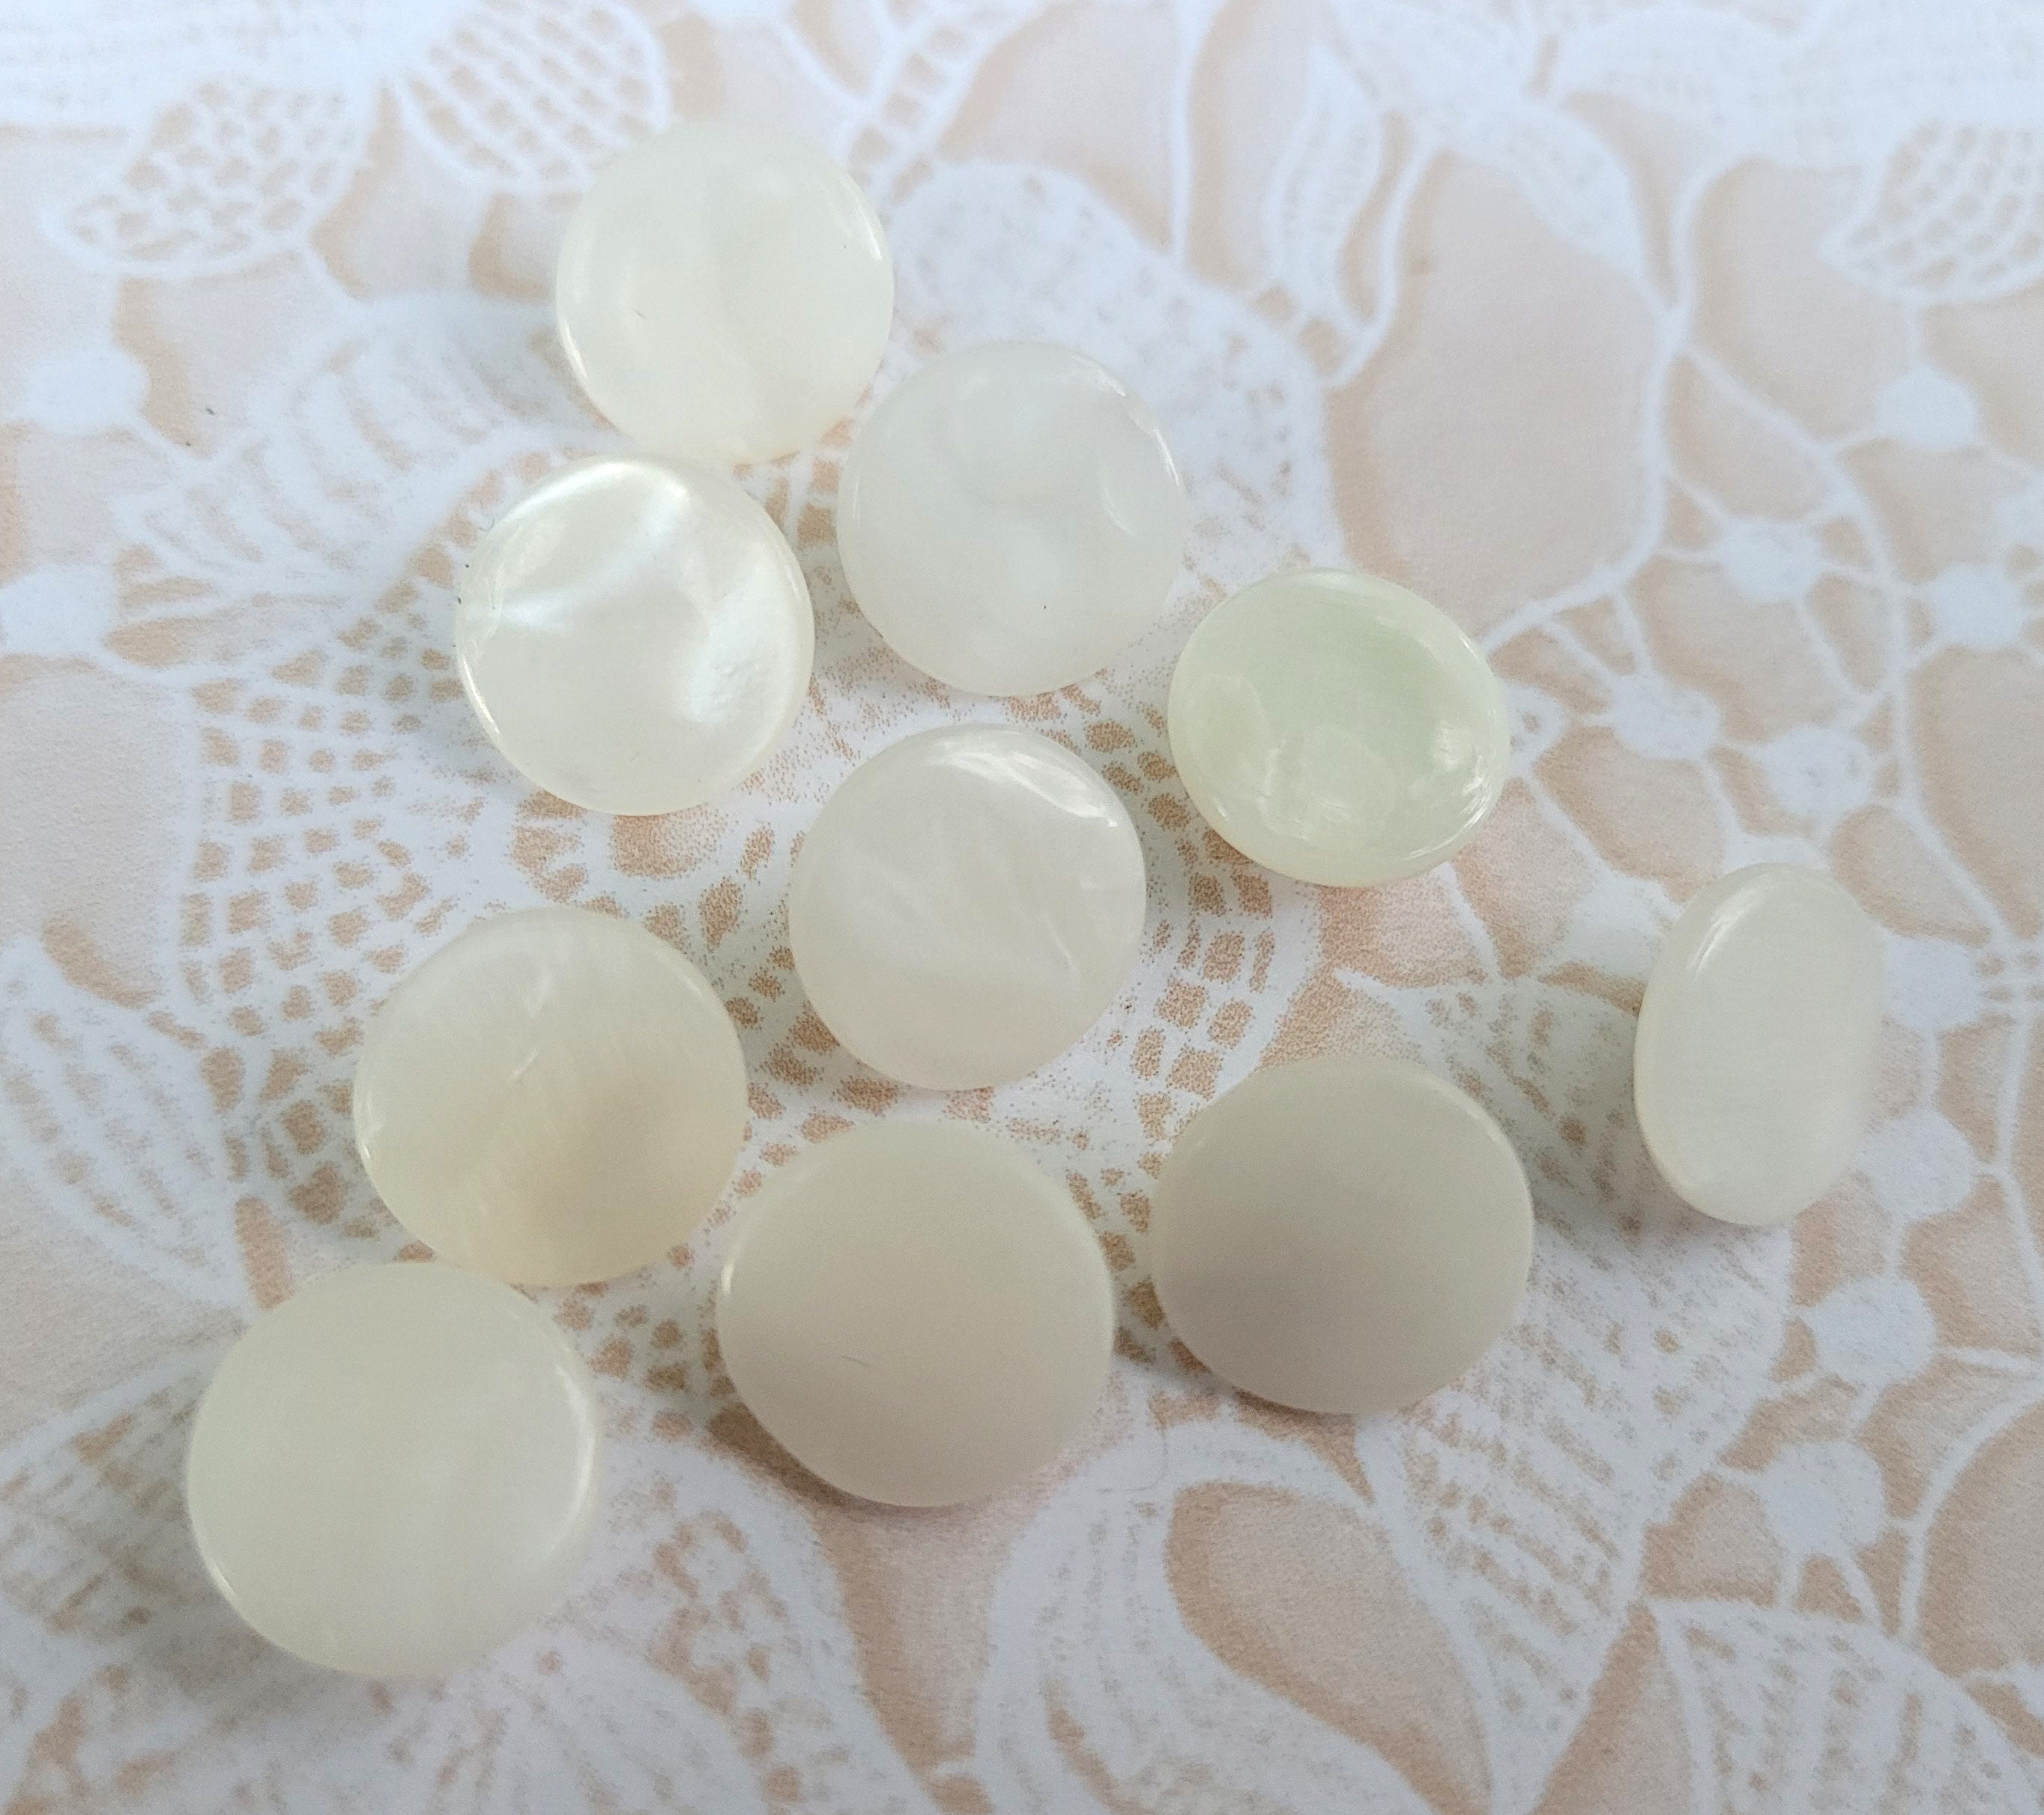 MJTrends: Small Buttons: White (3/8 inch)